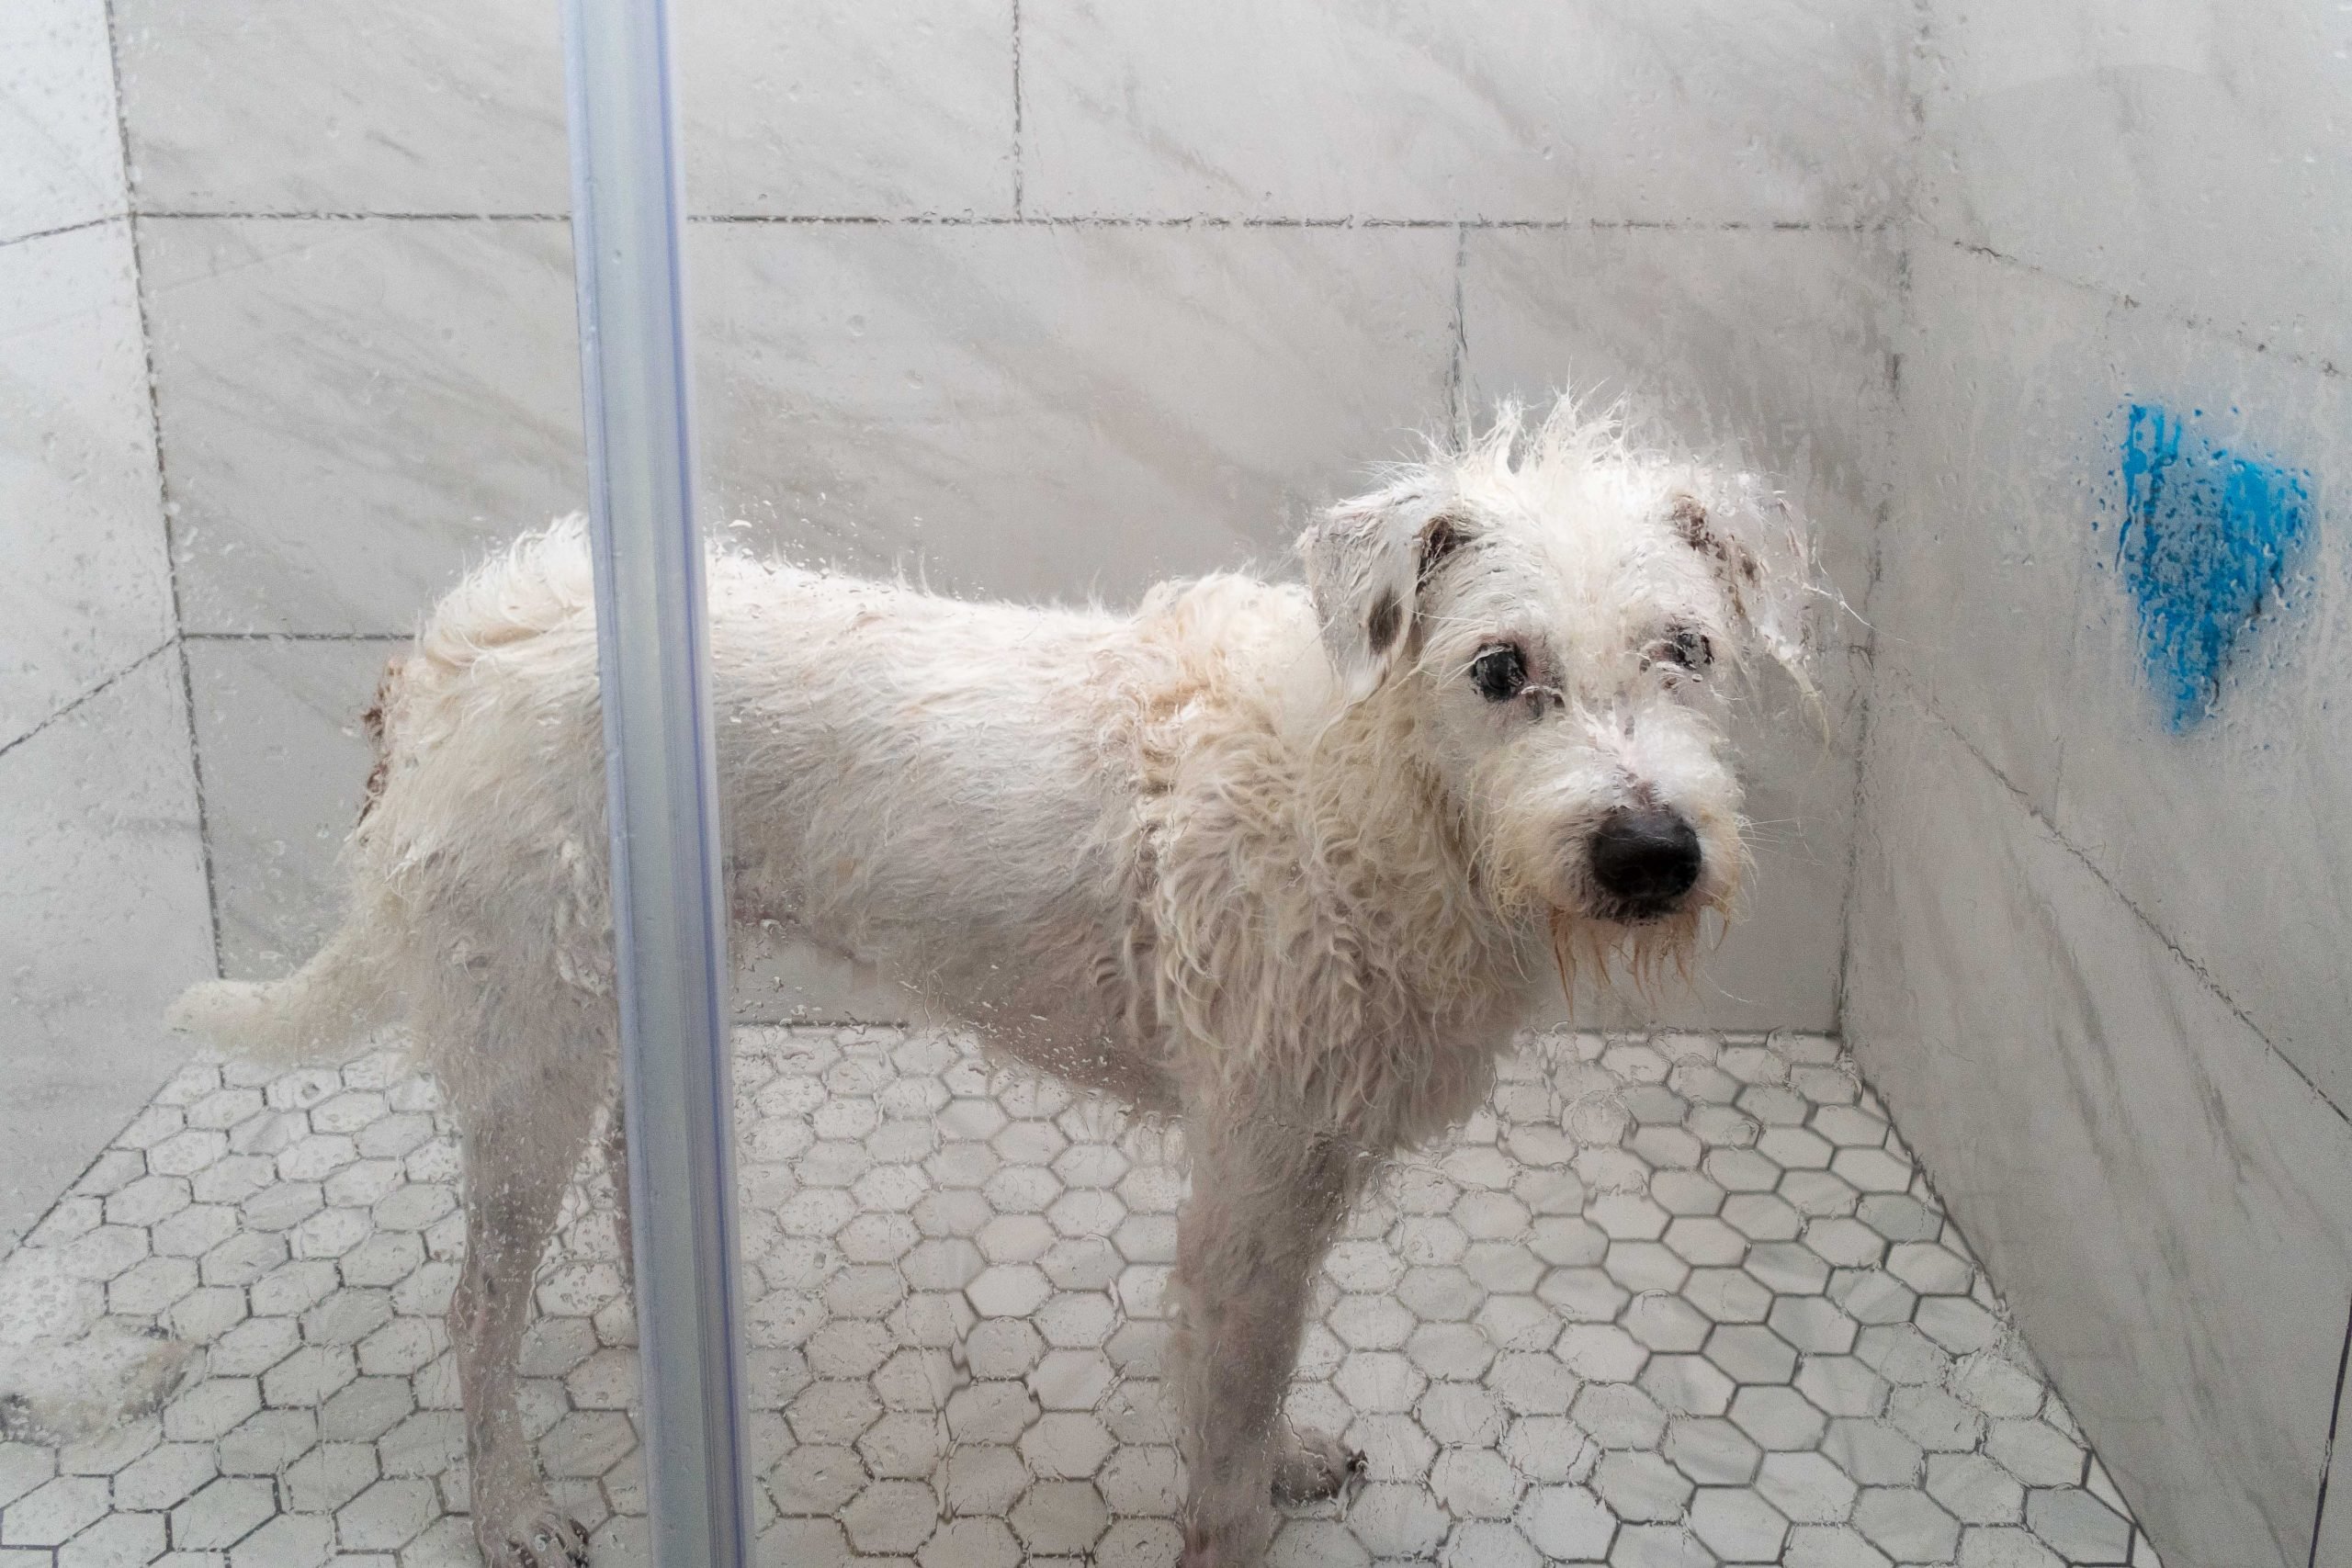 Wet dog stands in shower, looking at camera